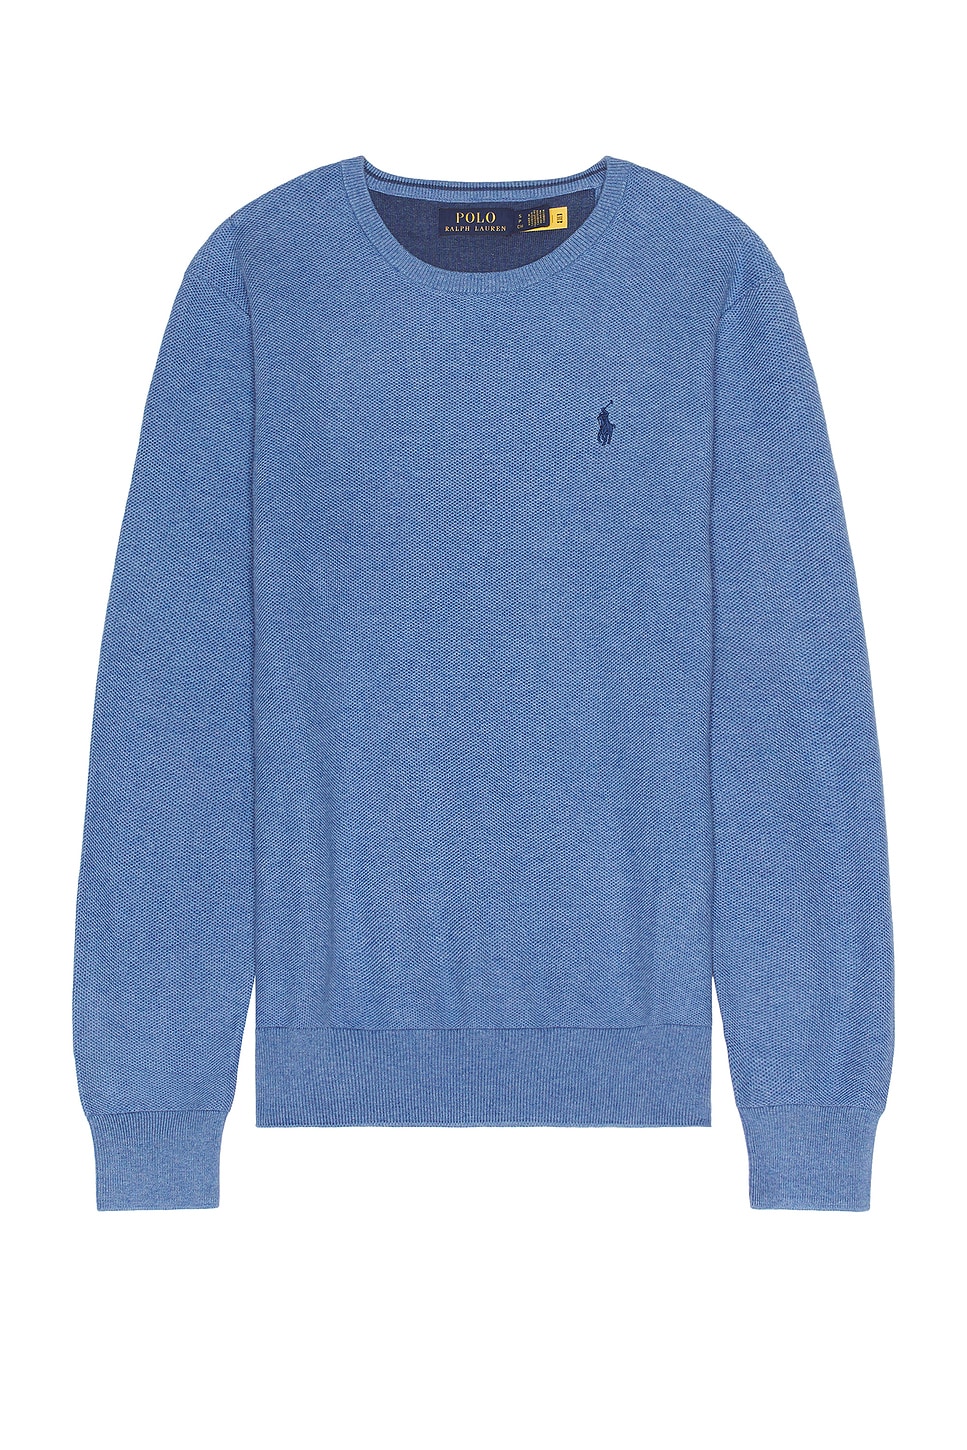 Image 1 of Polo Ralph Lauren Long Sleeve Sweater in Blue Stone Heather